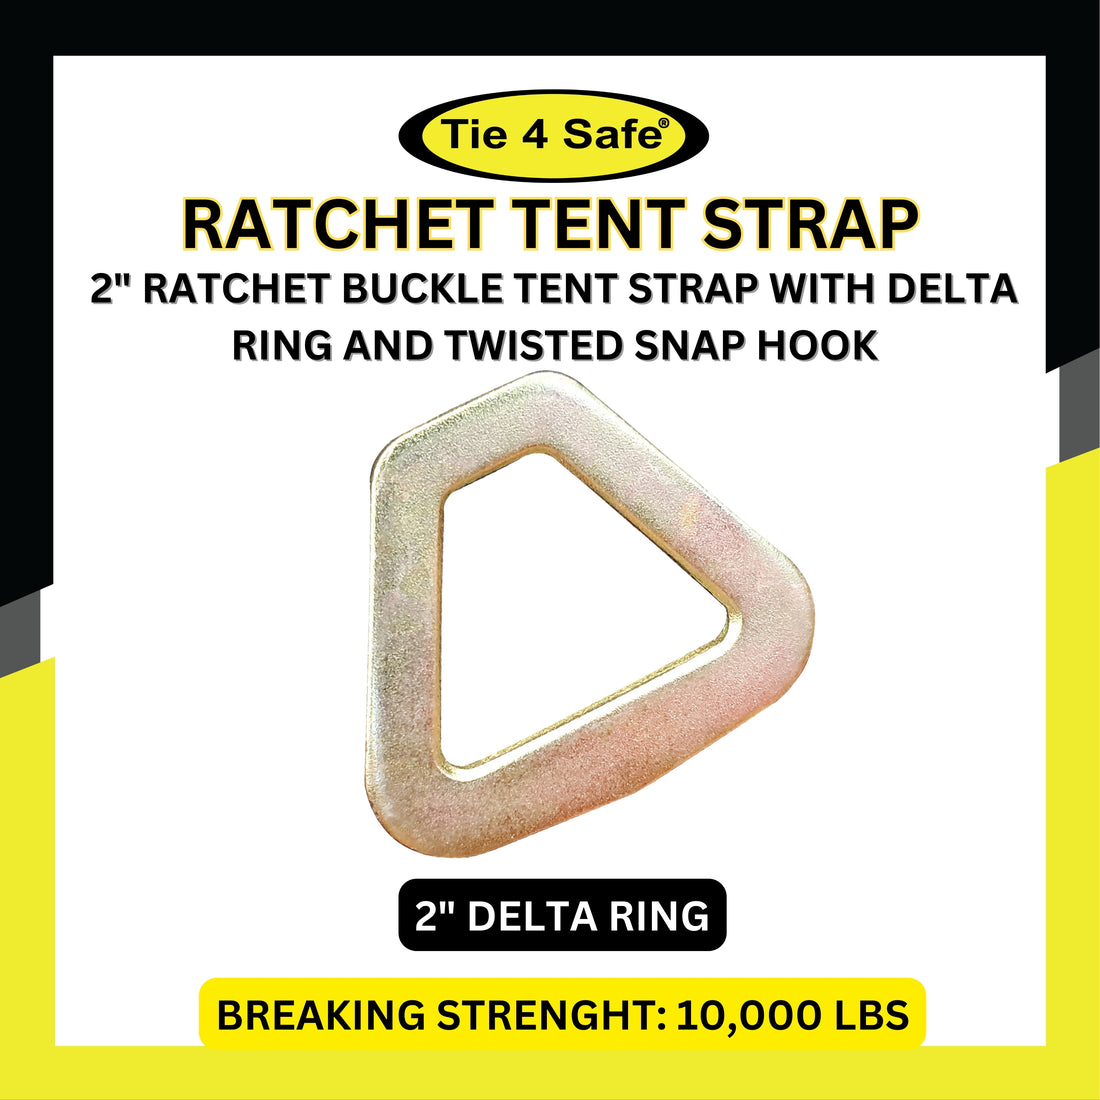 2" Ratchet Buckle Tent Strap With Delta Ring And Twisted Snap Hook